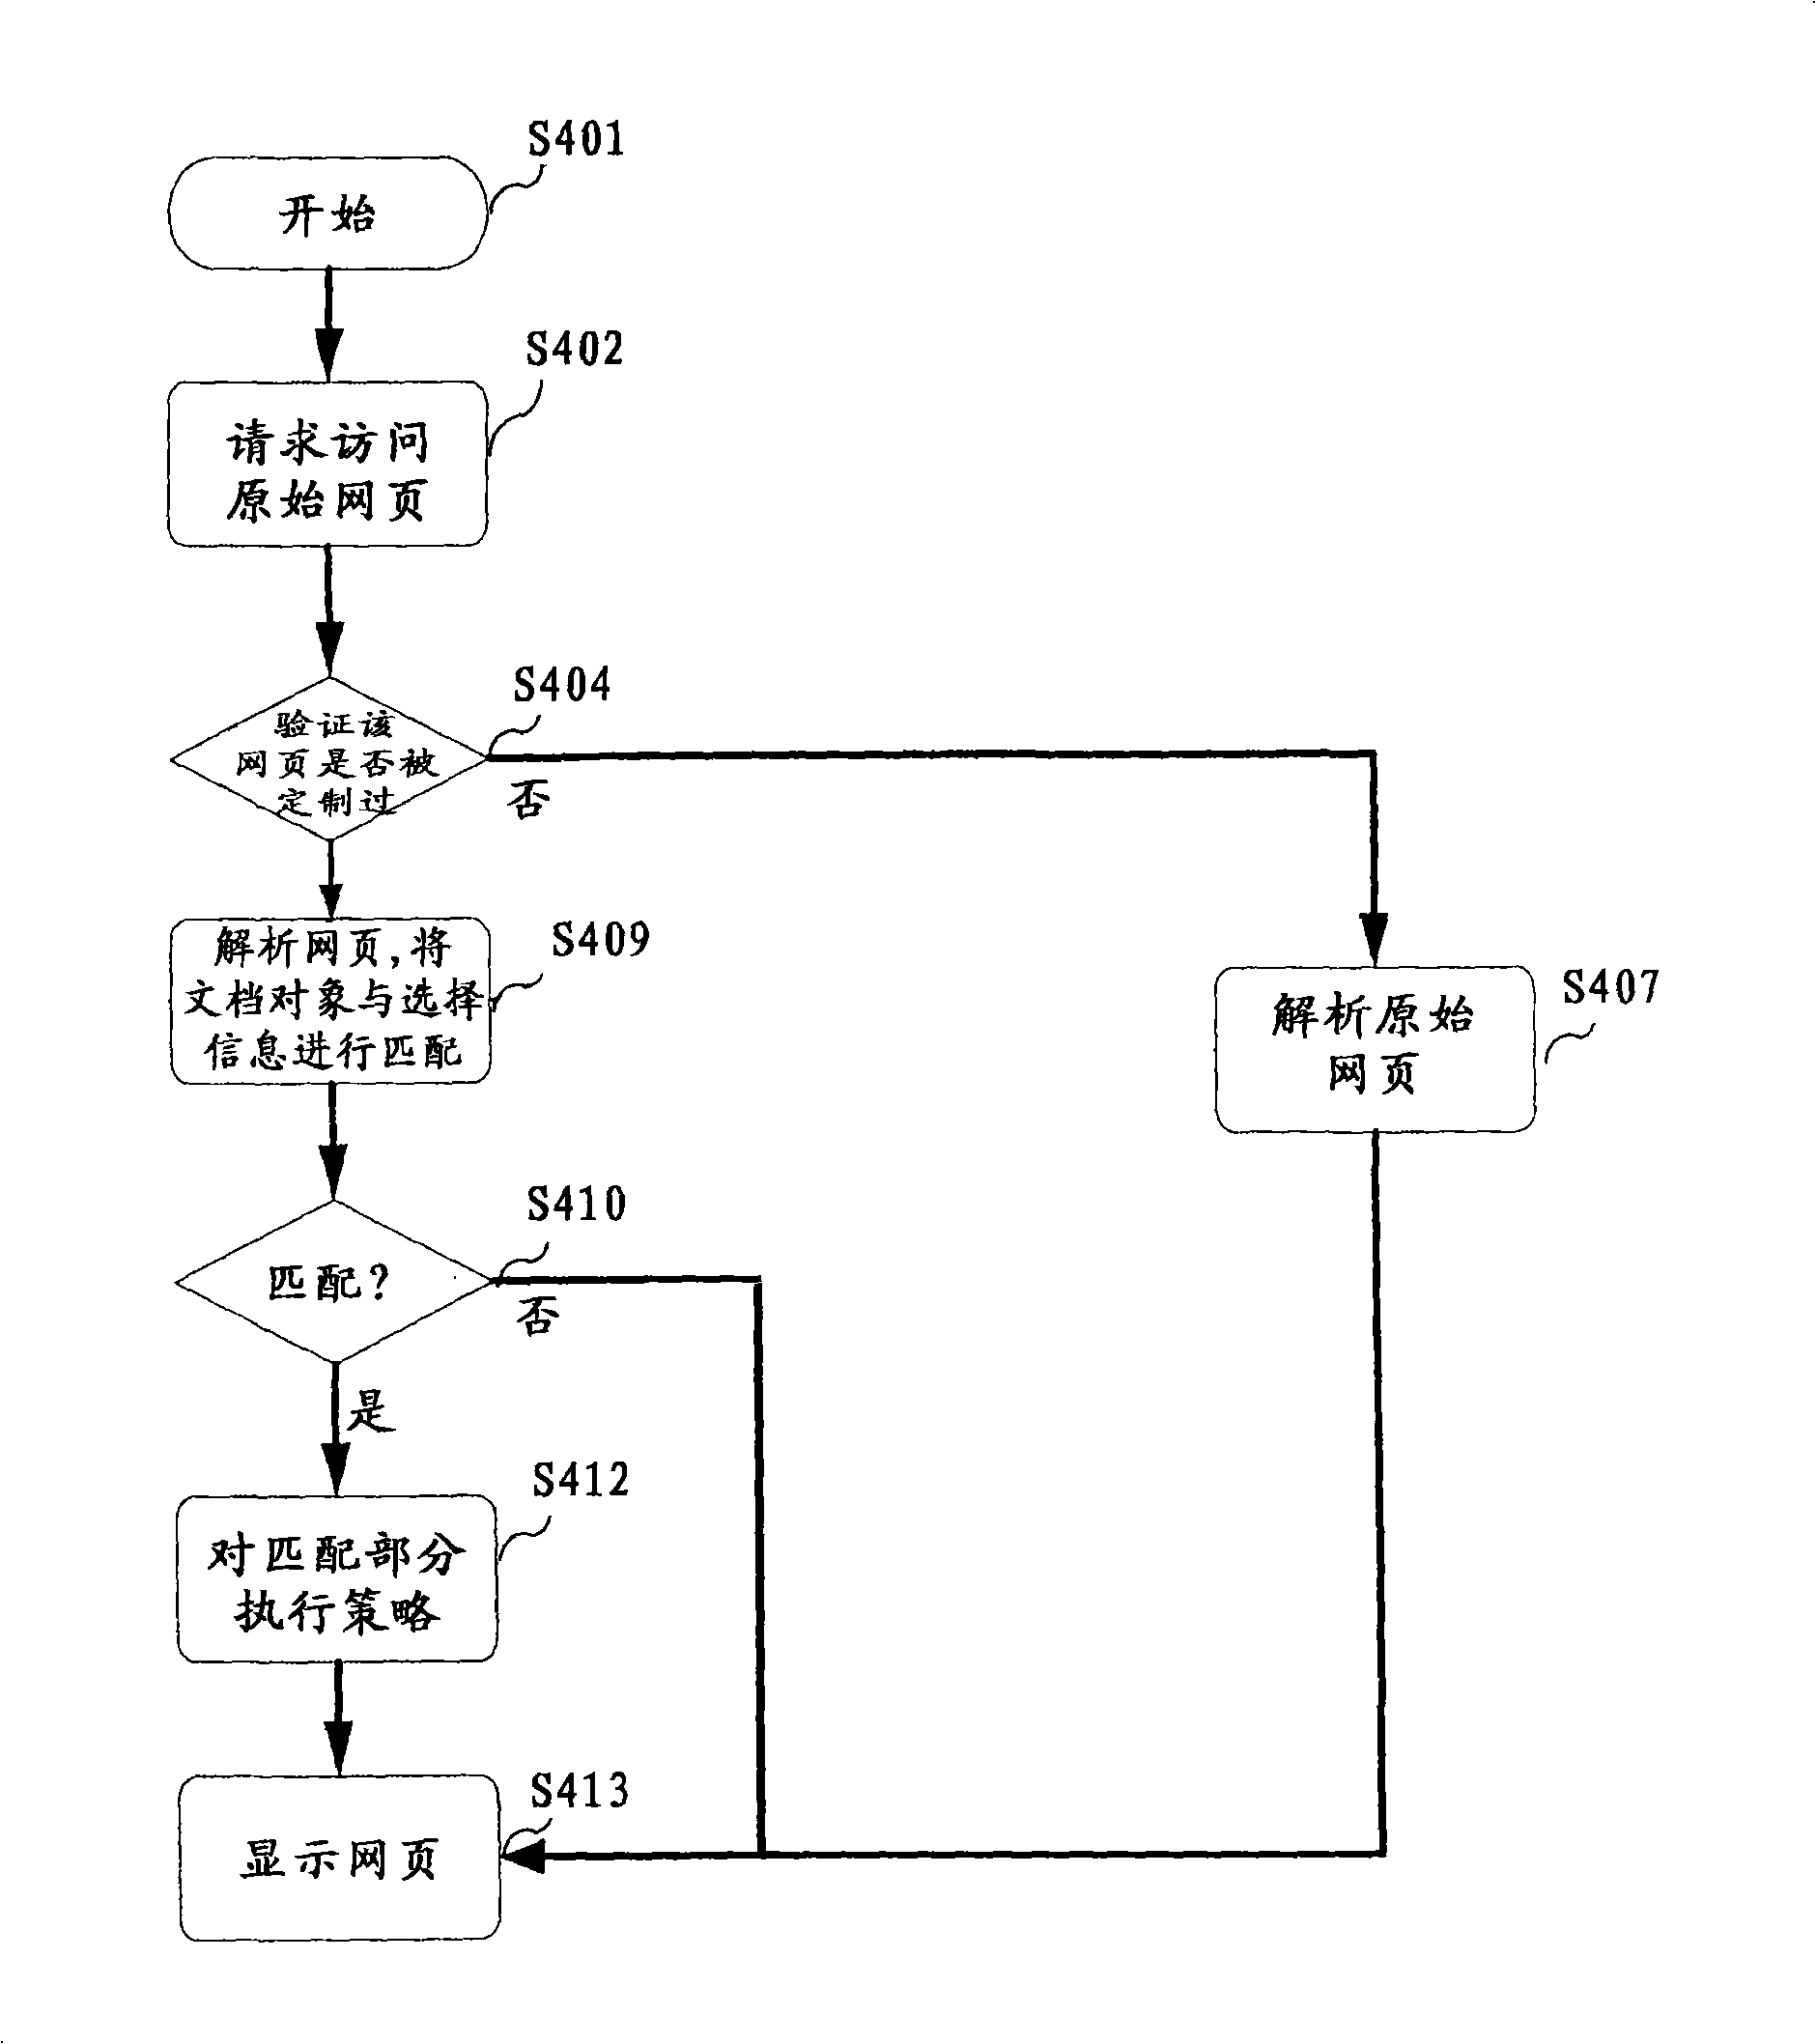 Apparatus and method for optimizing and differencing web page browsing